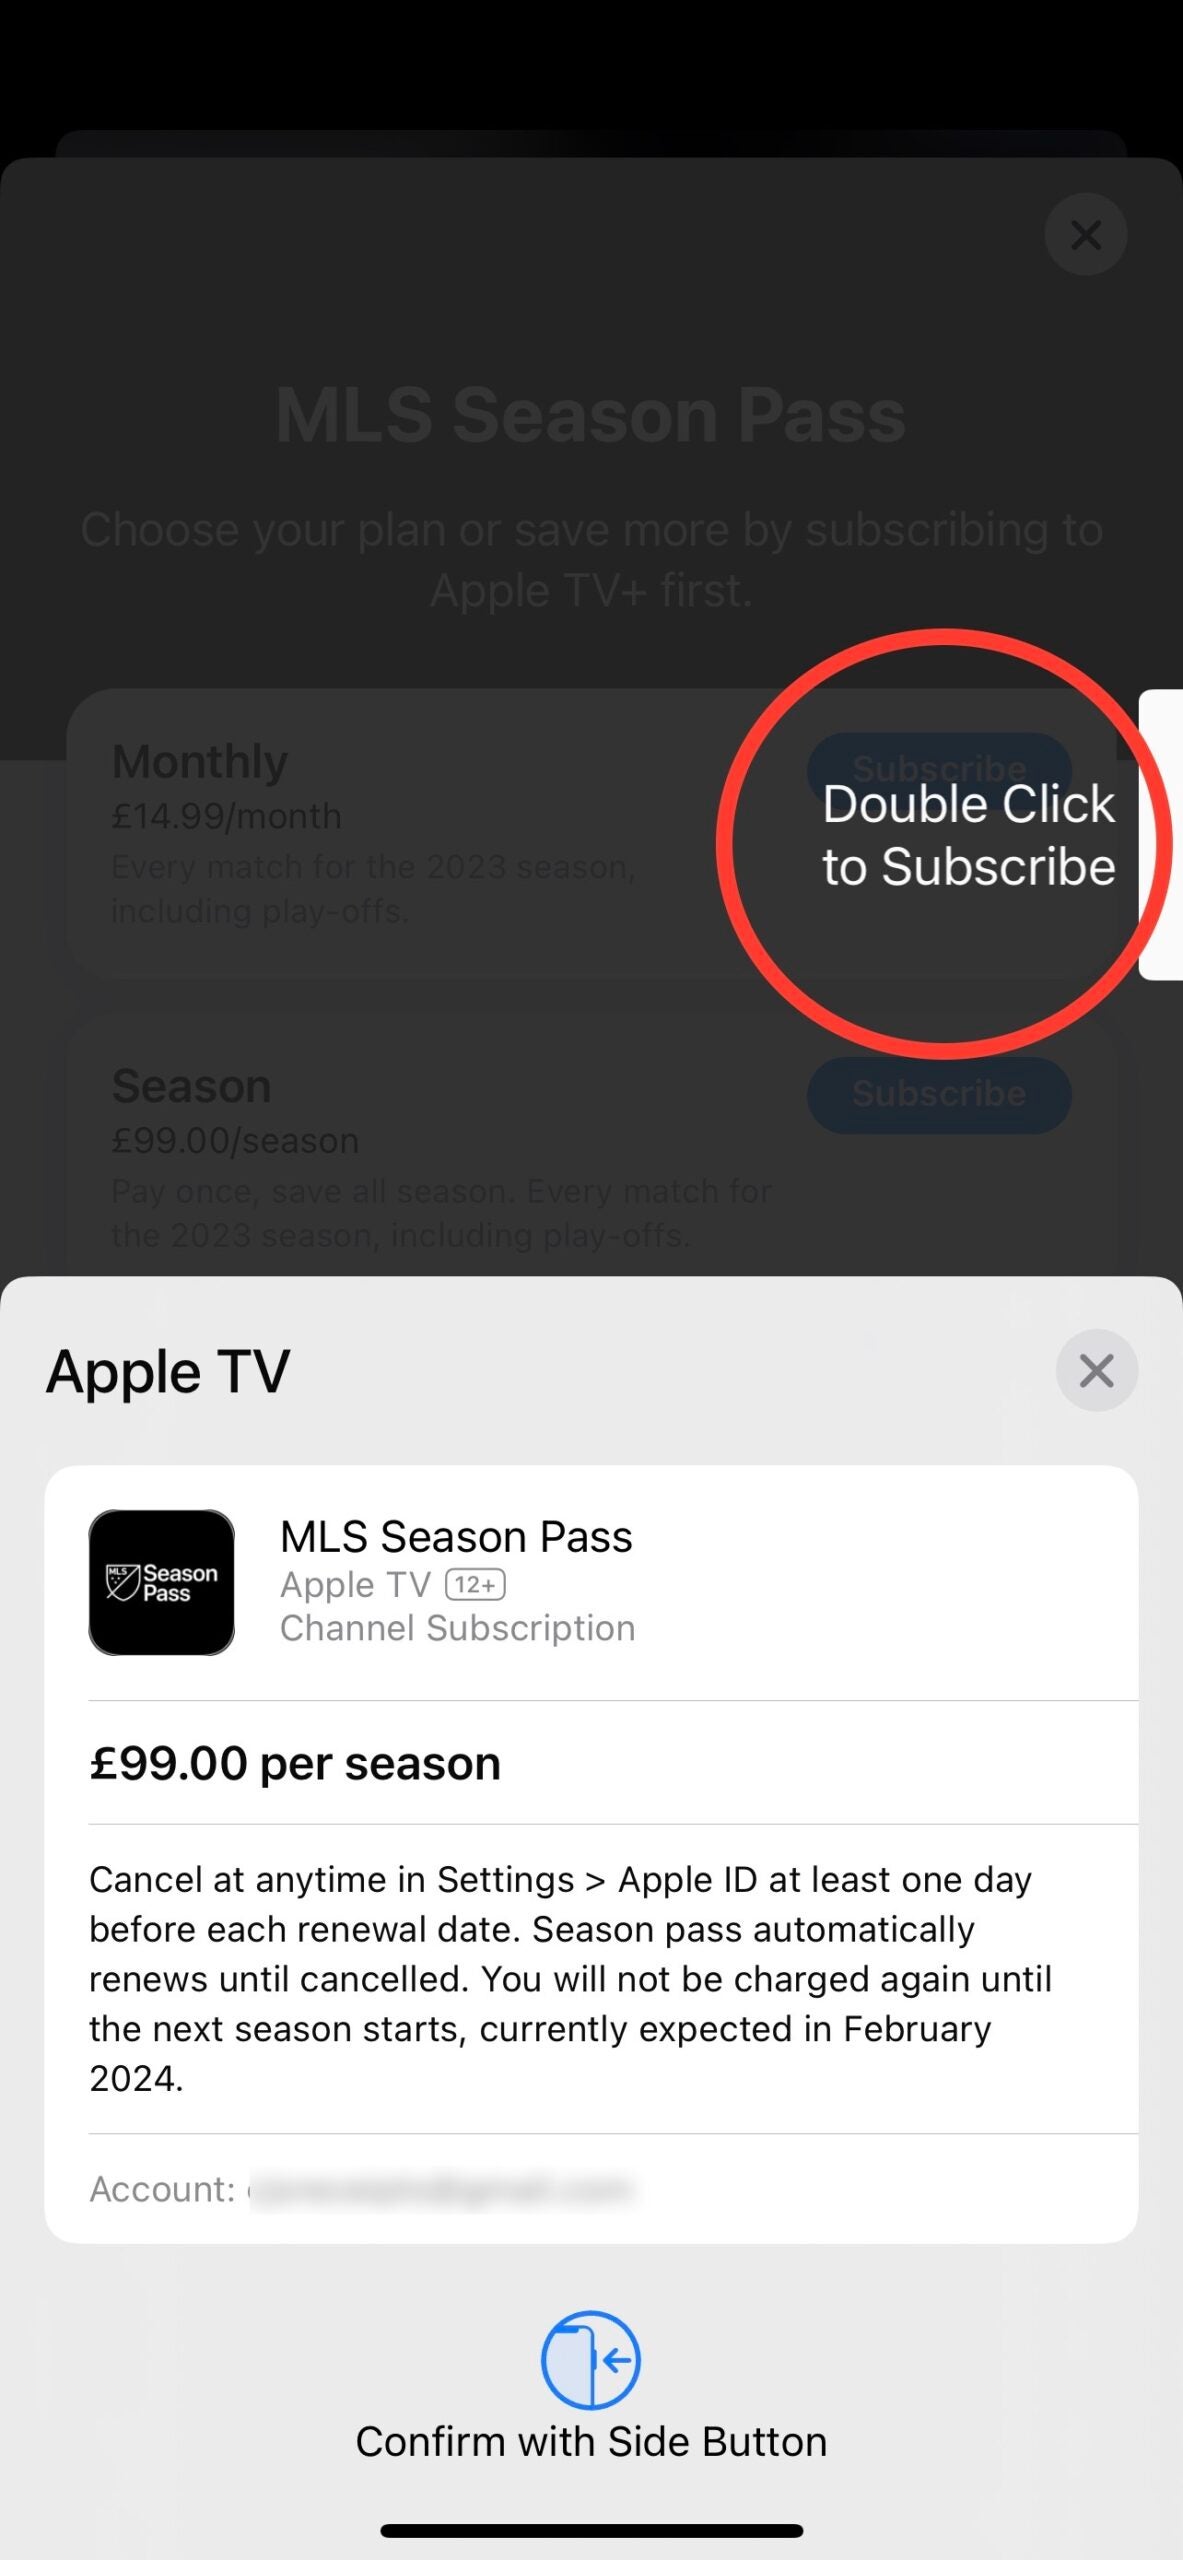 How to sign up MLS Season Pass Apple TV